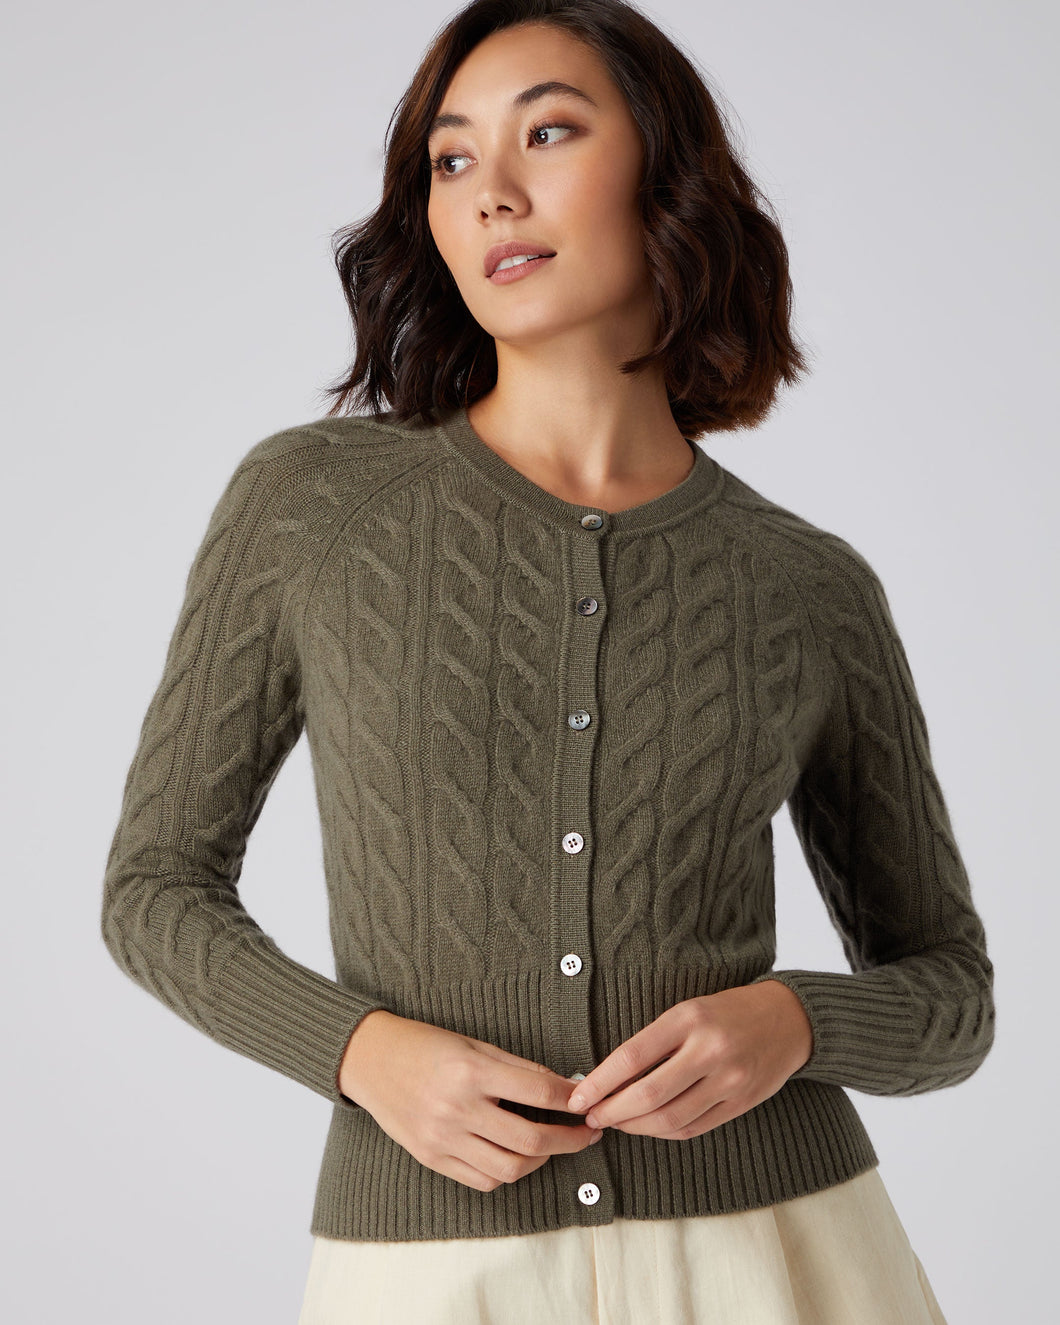 N.Peal Women's Cable Cashmere Cardigan Khaki Green